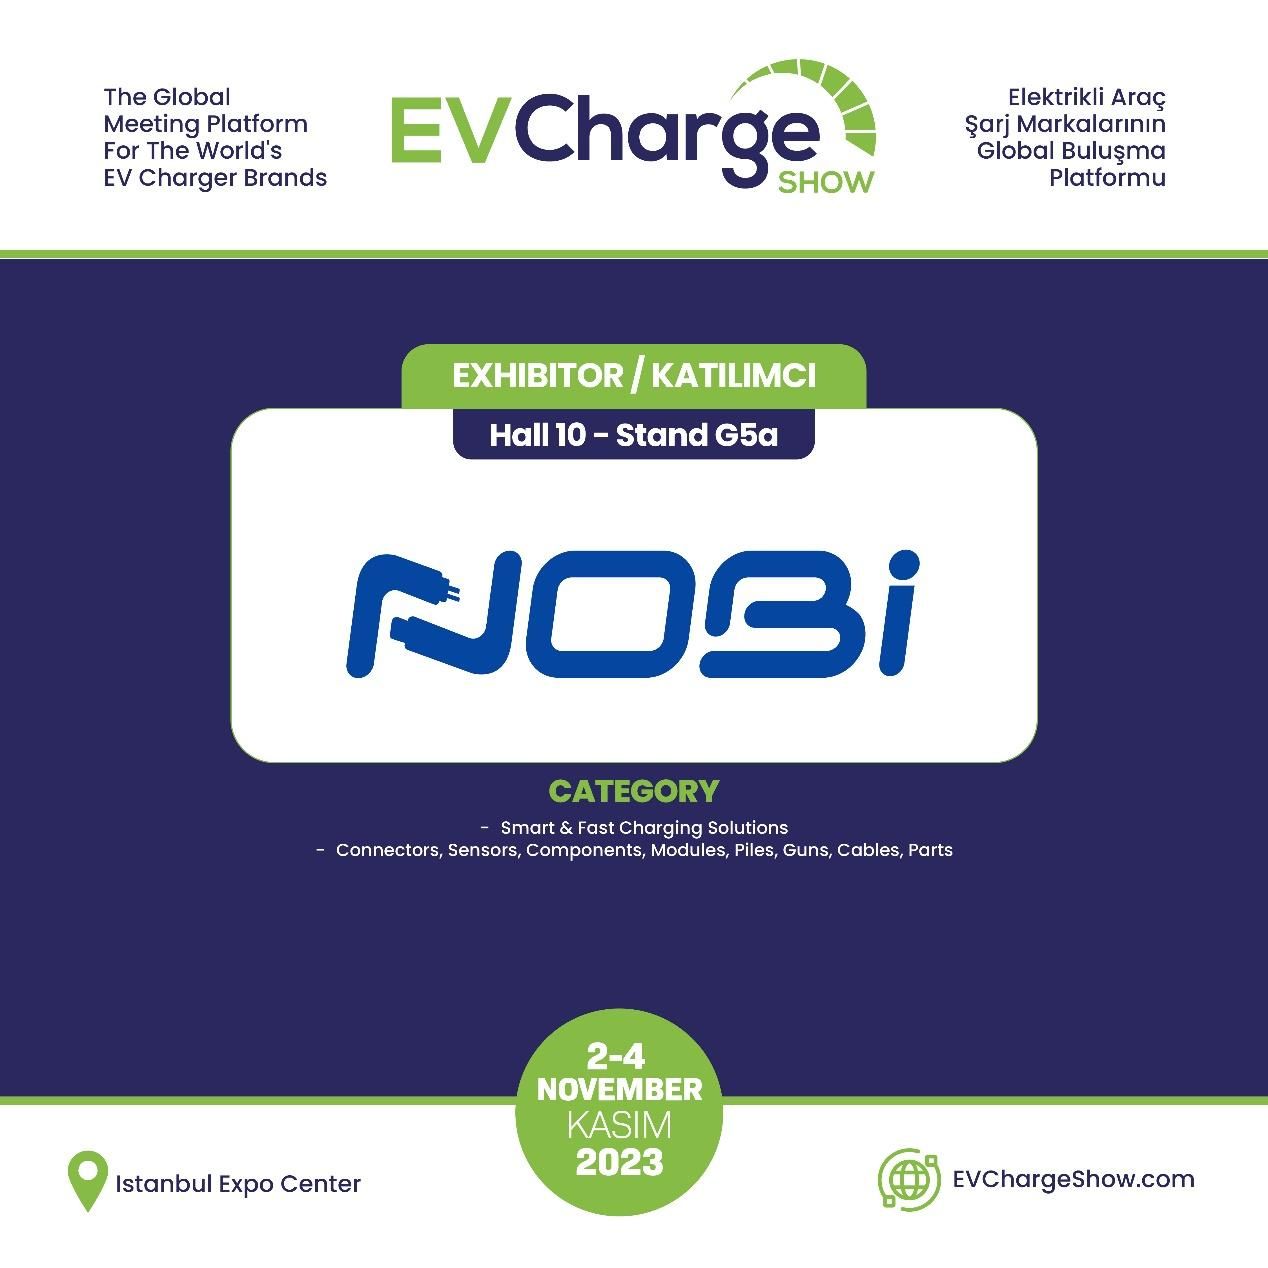 Nobi EV Charger will attended the EV Charge Show exhibition in Istanbul on 2023/11/2-2023/11/4.